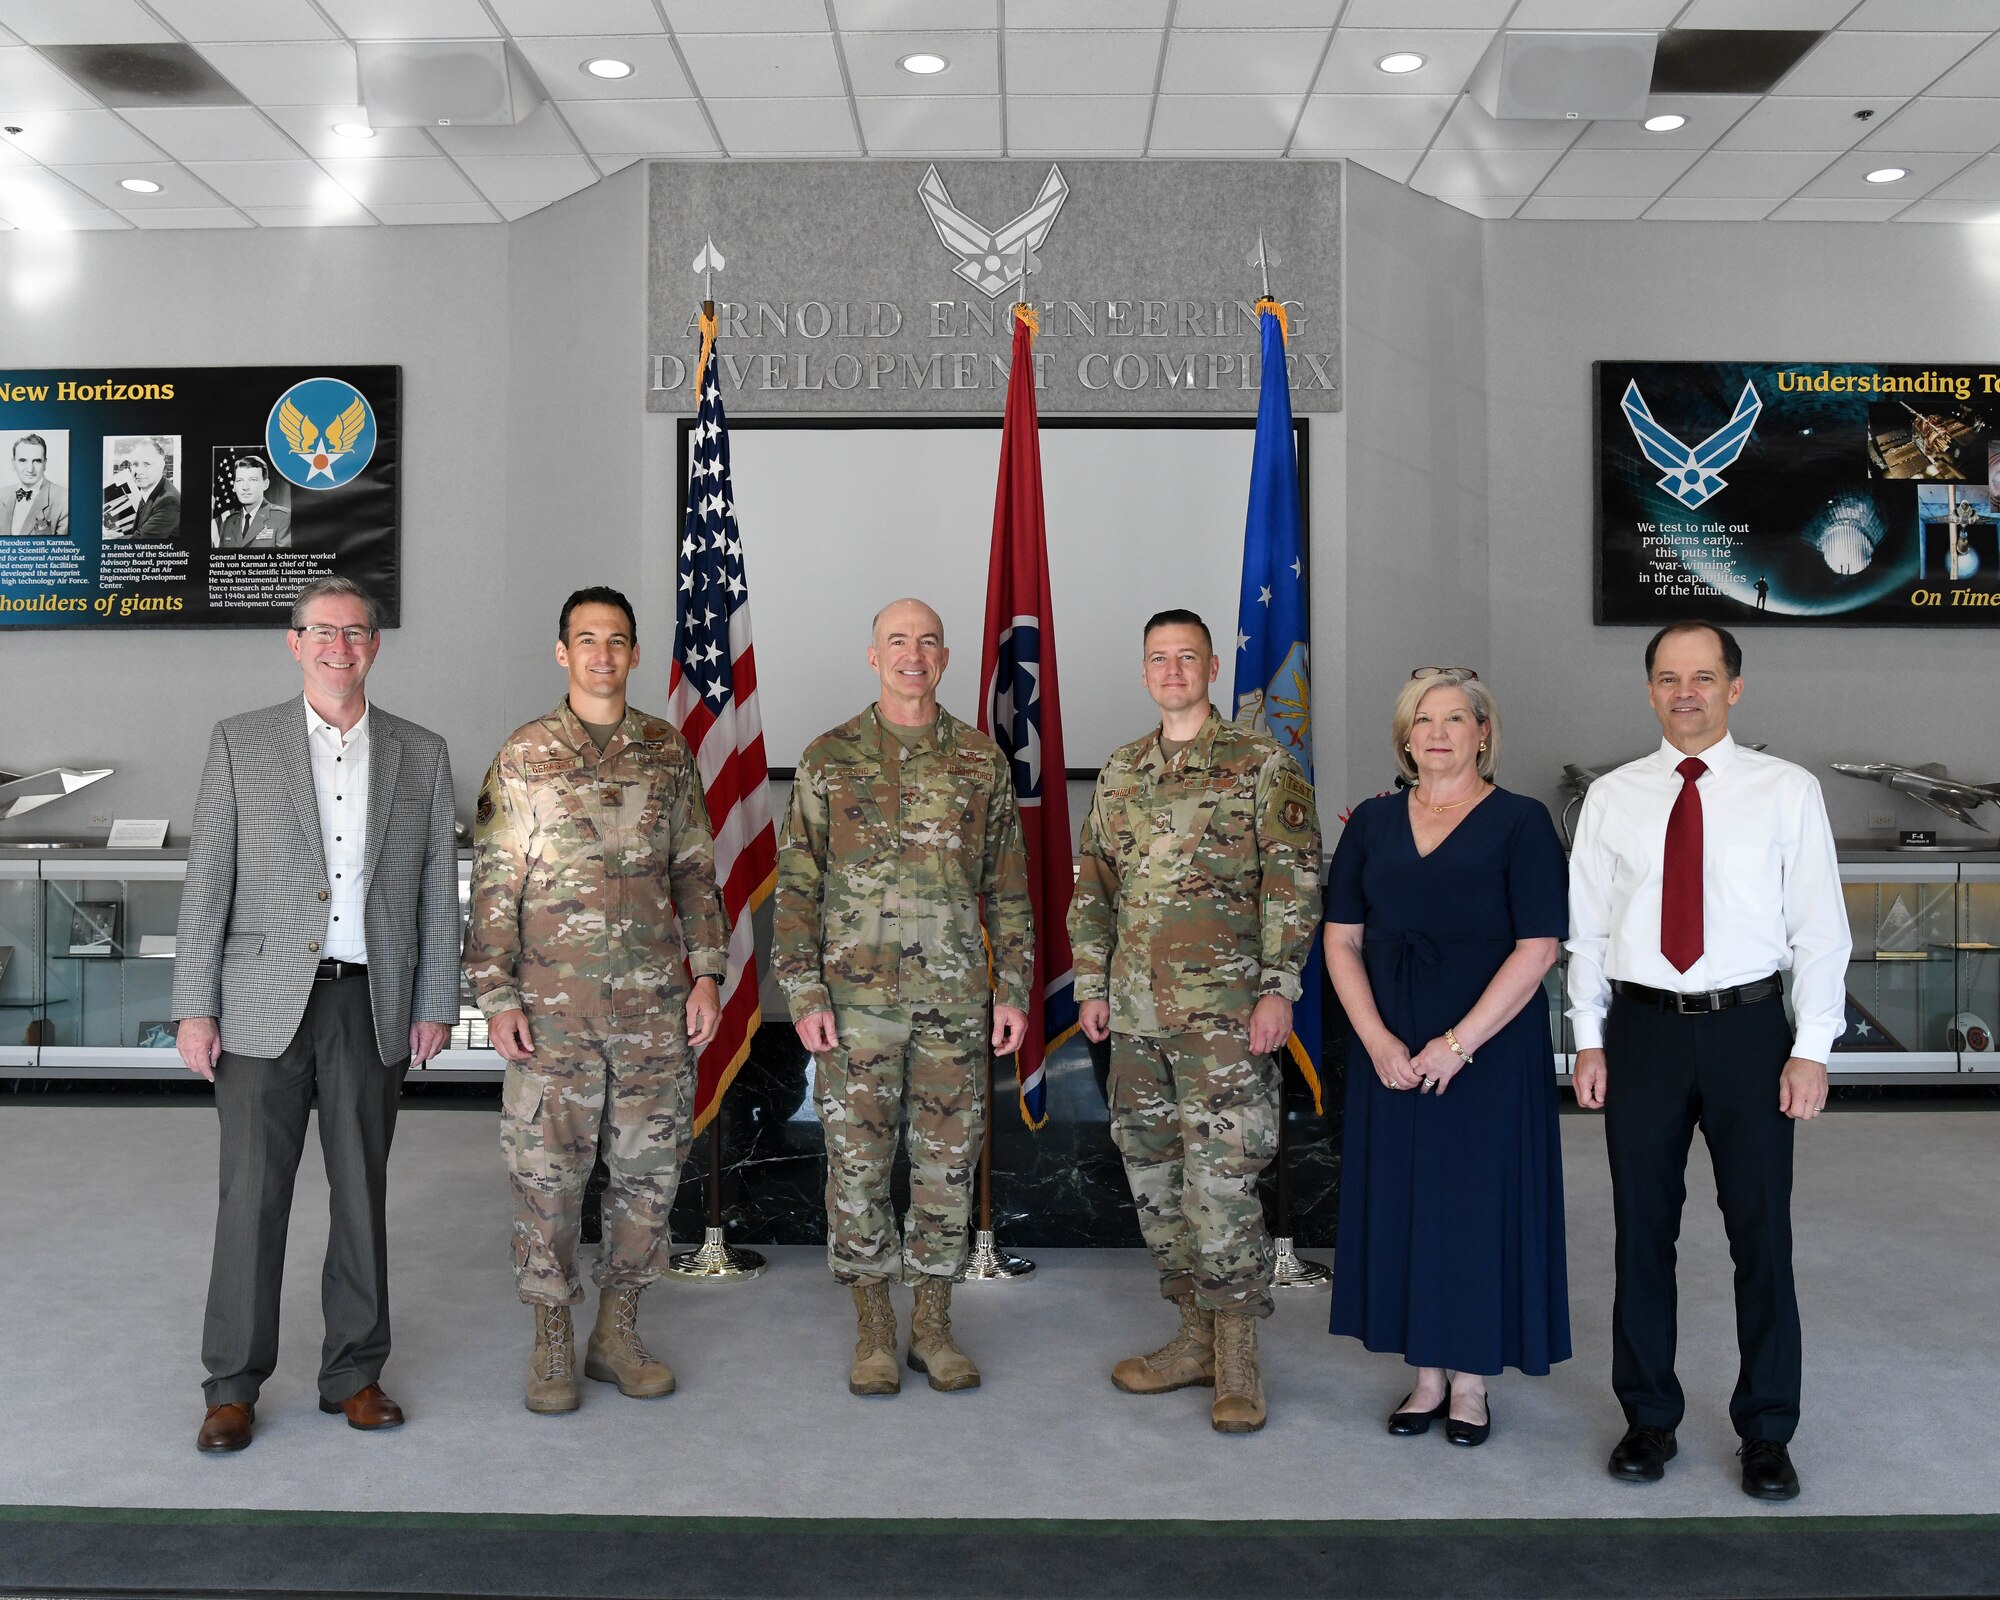 Maj. Gen. Christopher Azzano, third from left, commander, Air Force Test Center, pauses for a photo with Arnold Engineering Development Complex leadership during his farewell visit to Arnold Air Force Base, Tenn., June 30, 2021. Pictured left to right are: Jason Coker, AEDC vice-director; Col. Jeffrey Geraghty, AEDC commander; Azzano; Senior Master Sgt. Jason Harlan, interim superintendent; Sarah Beth Morgan, Complex support chief; and Ed Tucker, senior technical director. (U.S. Air Force photo by Jill Pickett)